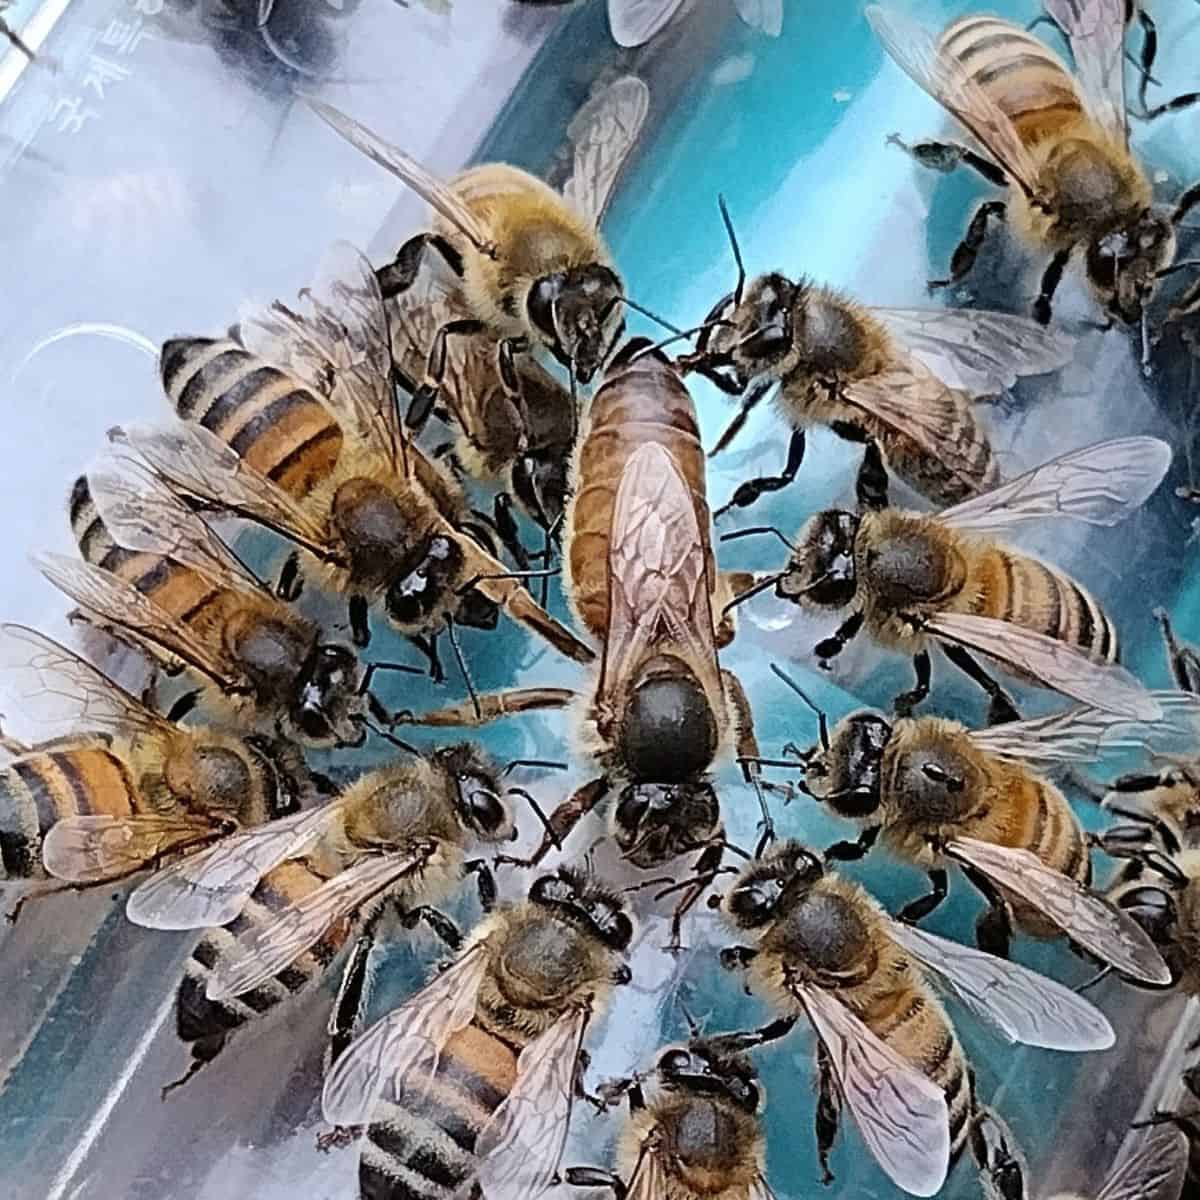 How to Find the Queen Bee in Your Hive